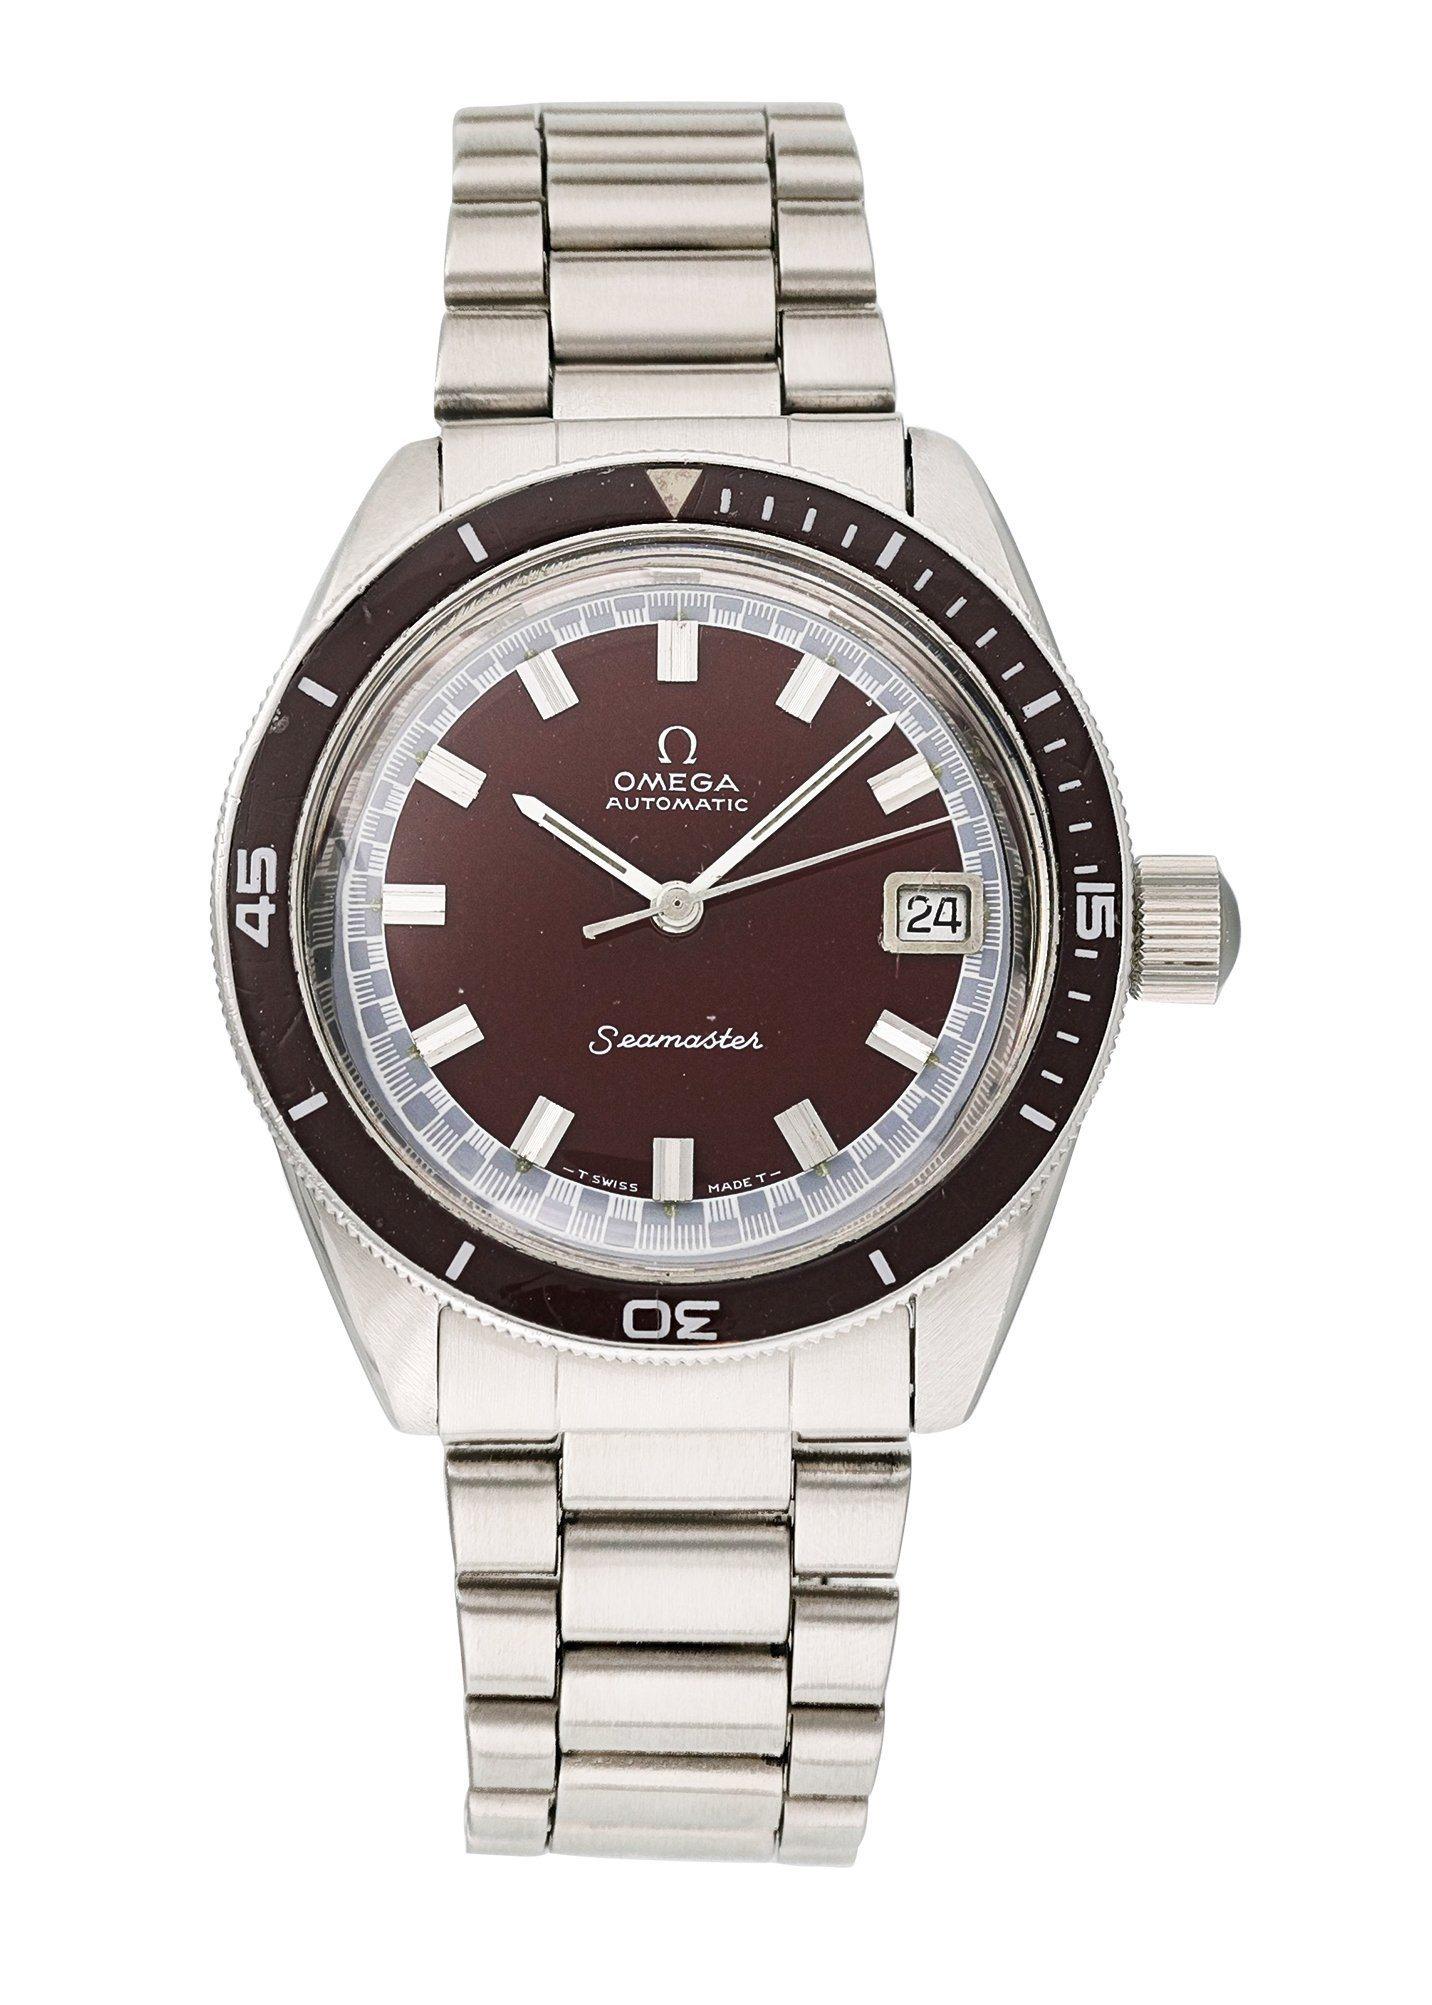 Omega Seamaster 60 Big Crown 166.062 Men Watch.
37mm Stainless Steel case. 
Stainless Steel Unidirectional bezel with Burgandy bezel insert. 
Burgundy dial with Luminous Steel hands and index hour markers. 
Minute markers on the outer dial. 
Date